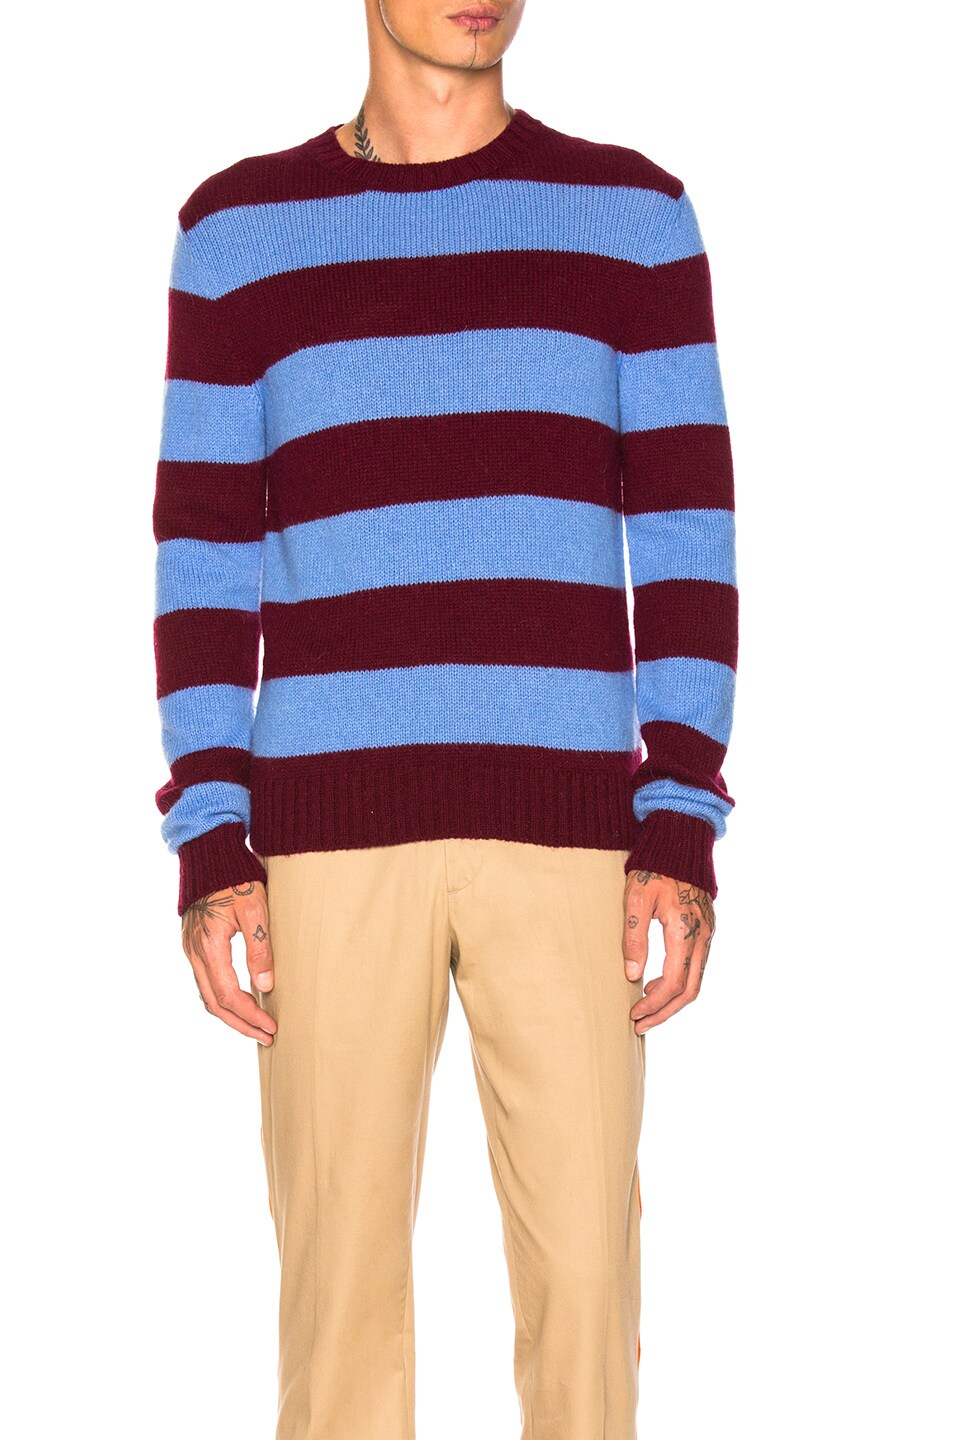 Image 1 of CALVIN KLEIN 205W39NYC Striped Sweater in Plum & Light Azure